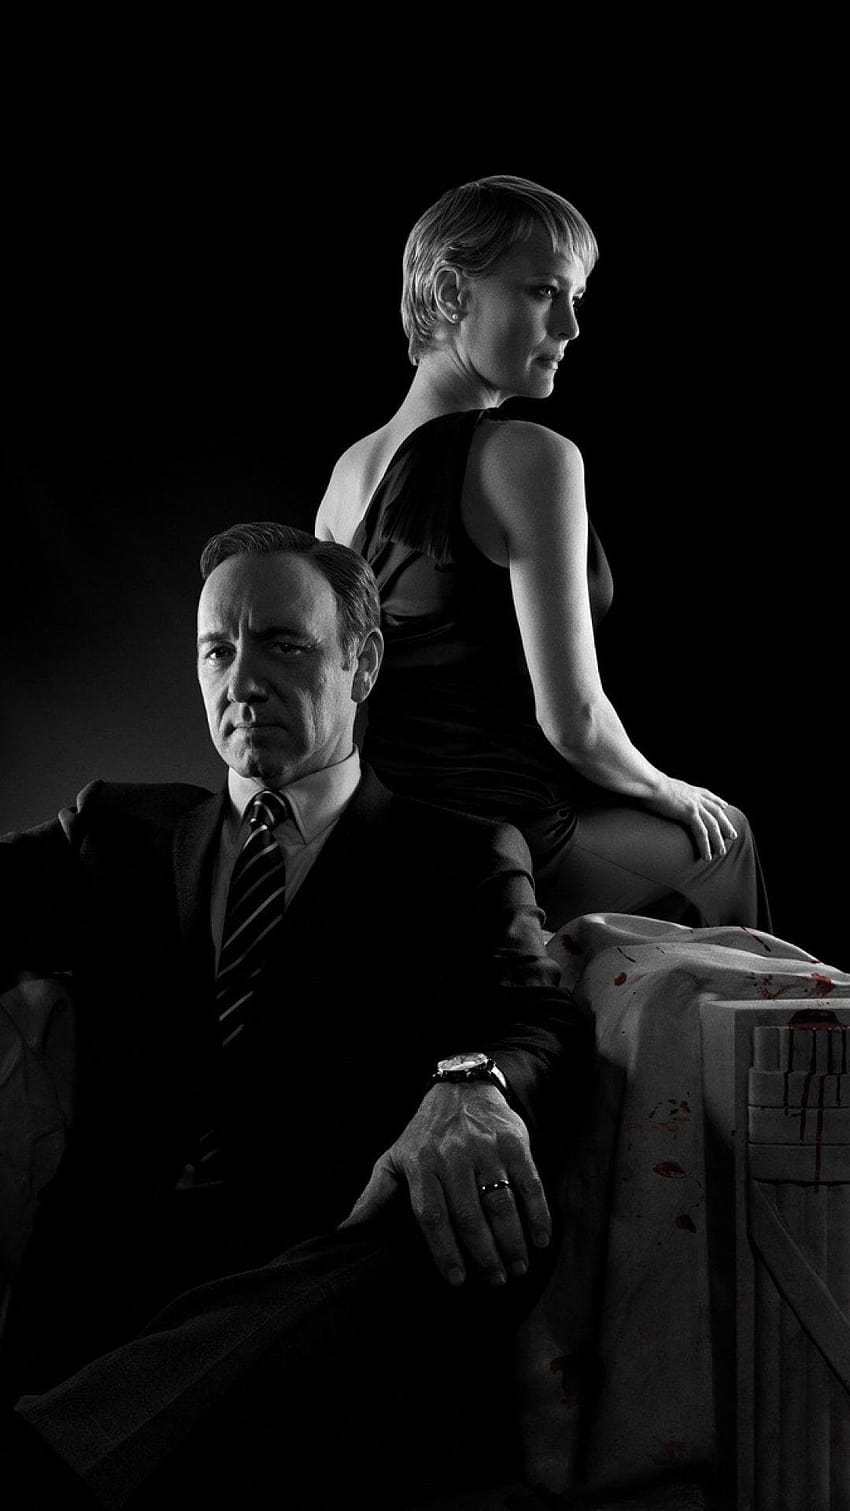 House of cards for iPhone 7, frank underwood HD phone wallpaper